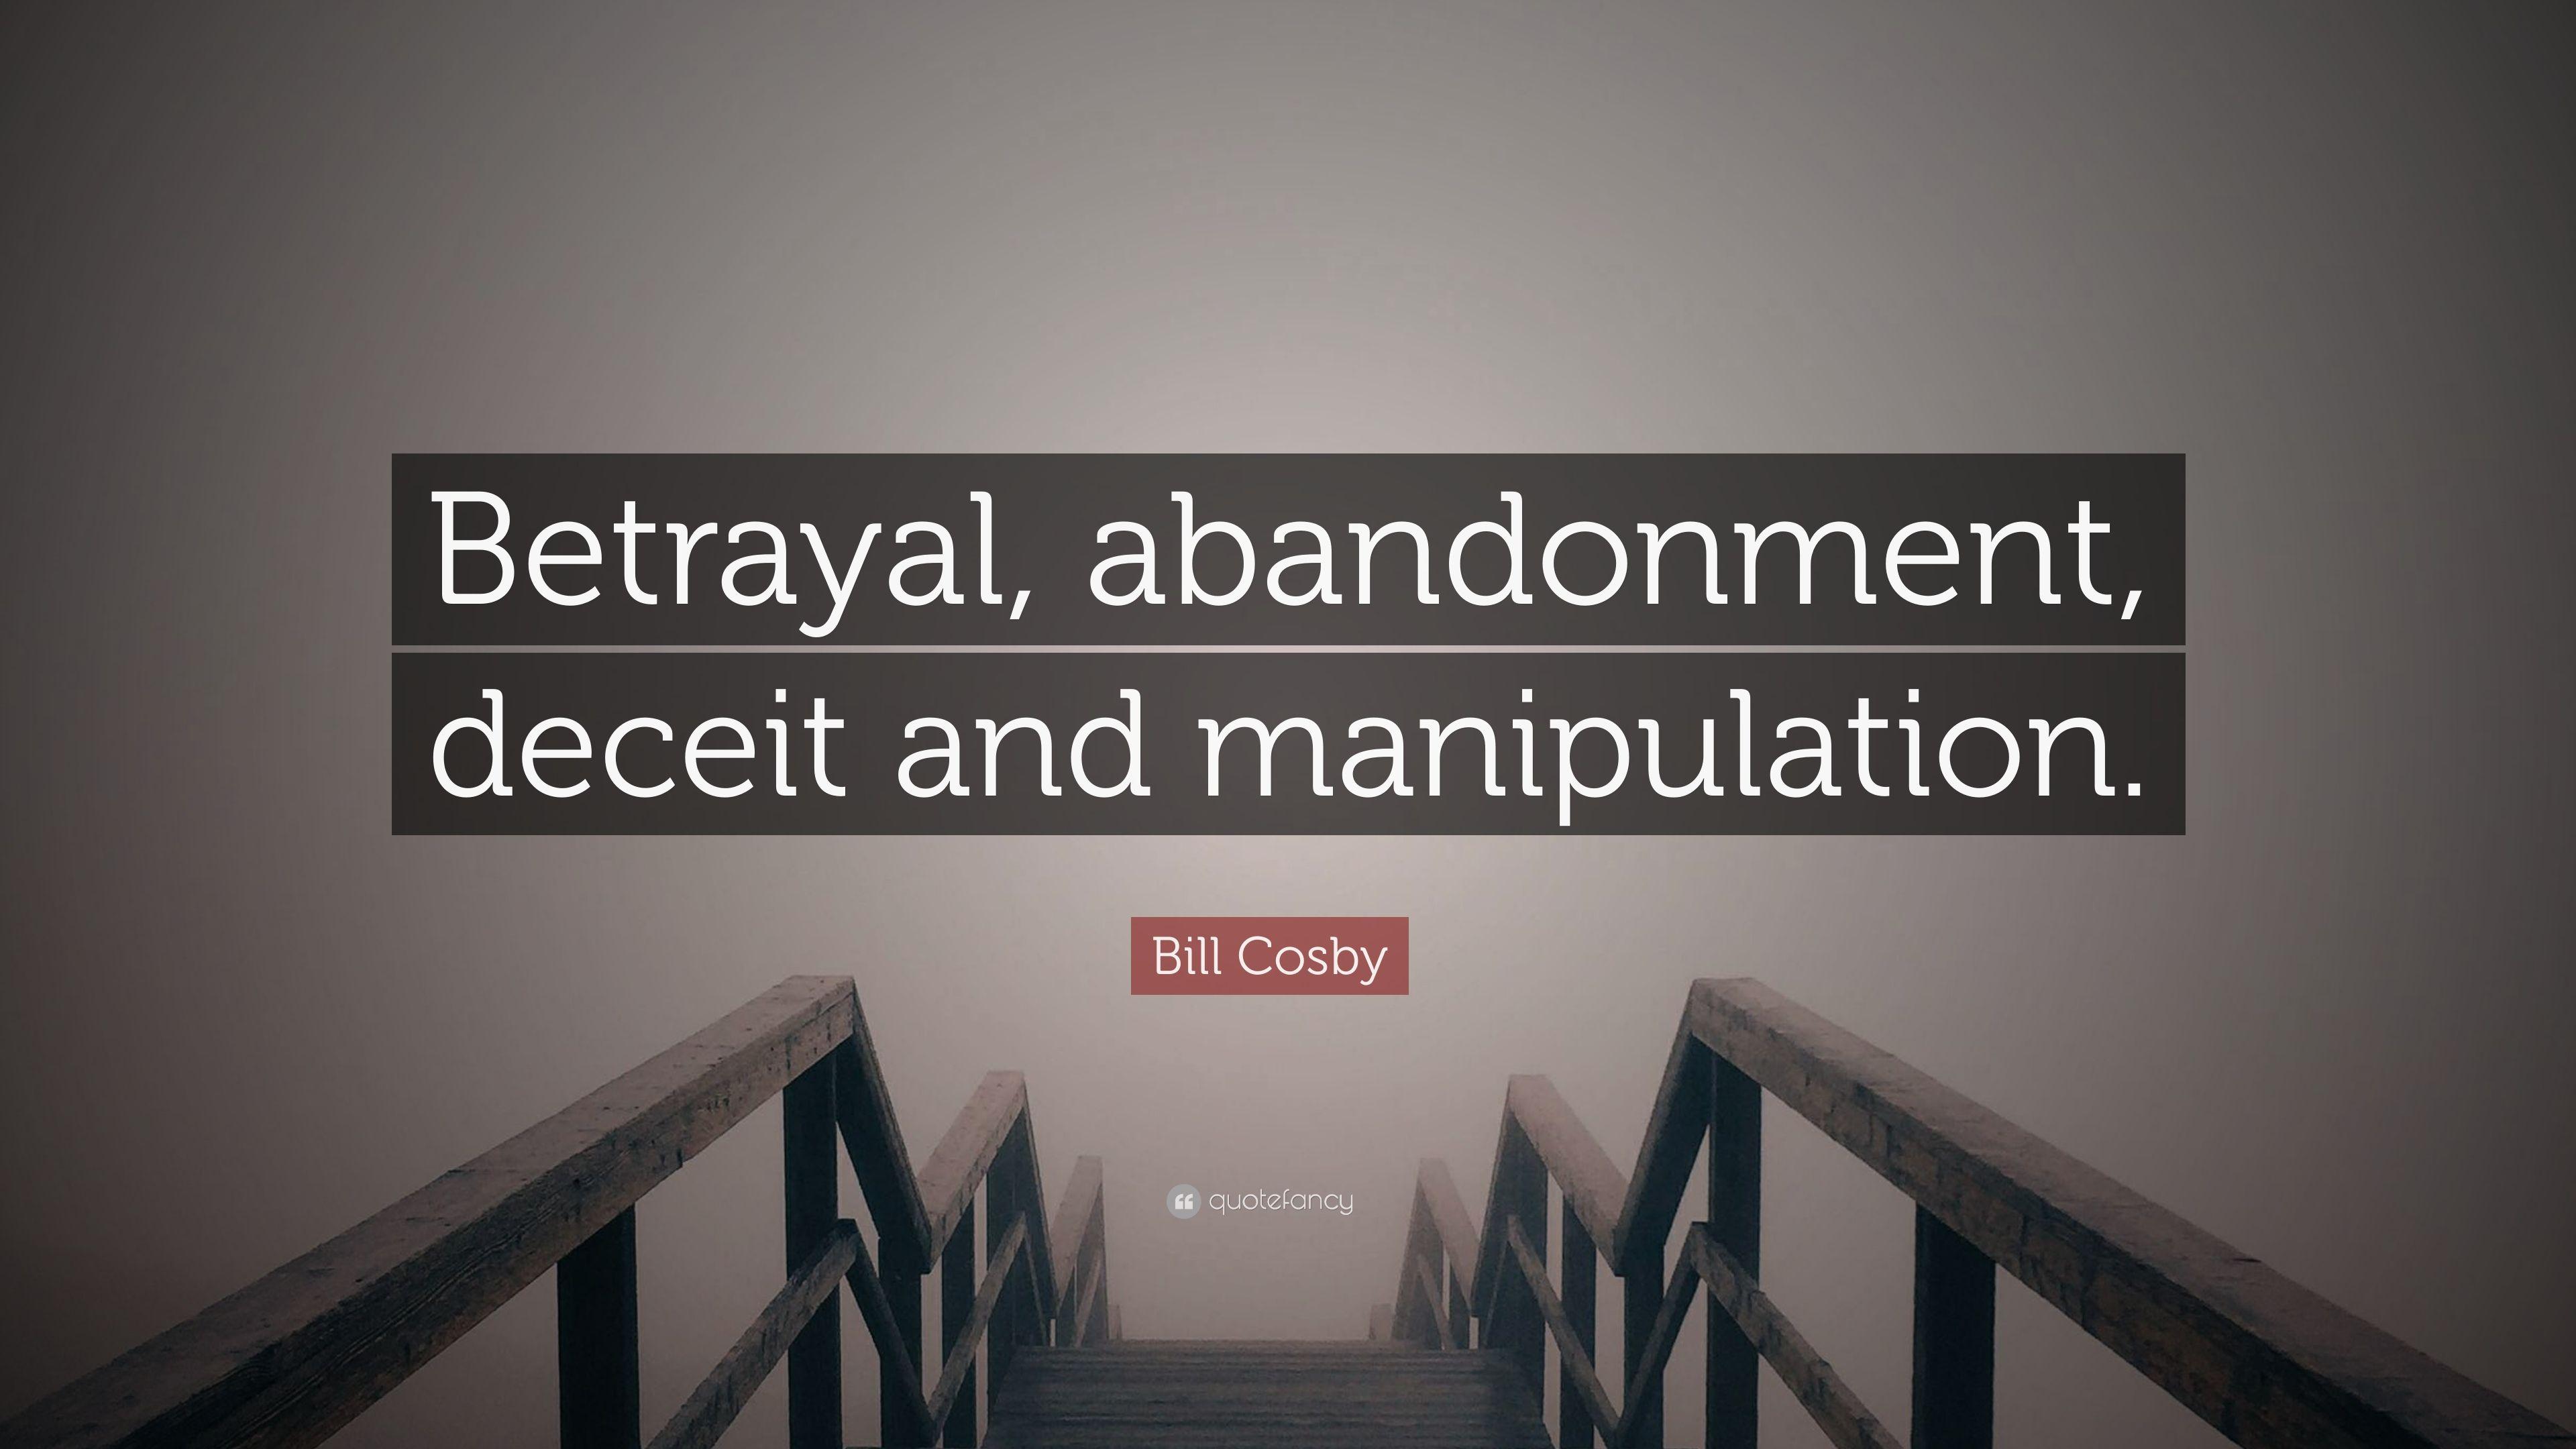 Bill Cosby Quote: “Betrayal, abandonment, deceit and manipulation